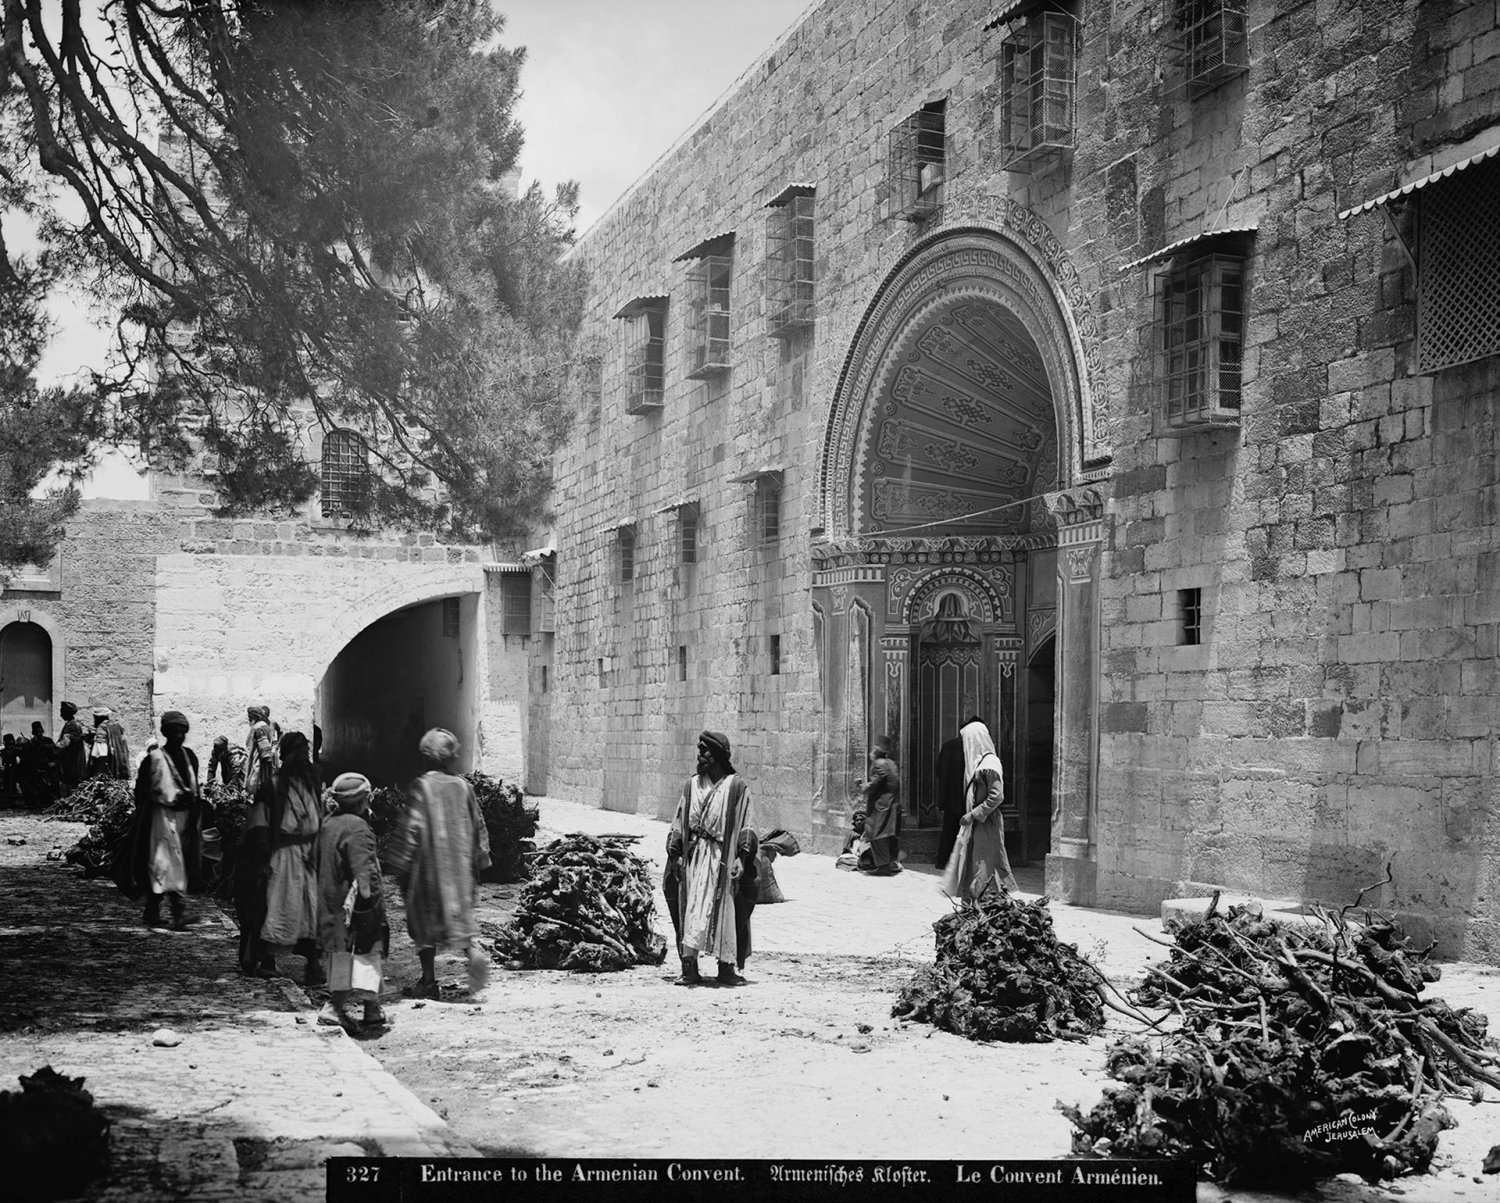 Entrance to the Armenian convent in the Armenian quarter of Jerusalems Old City, captured sometime between 1898 and 1914